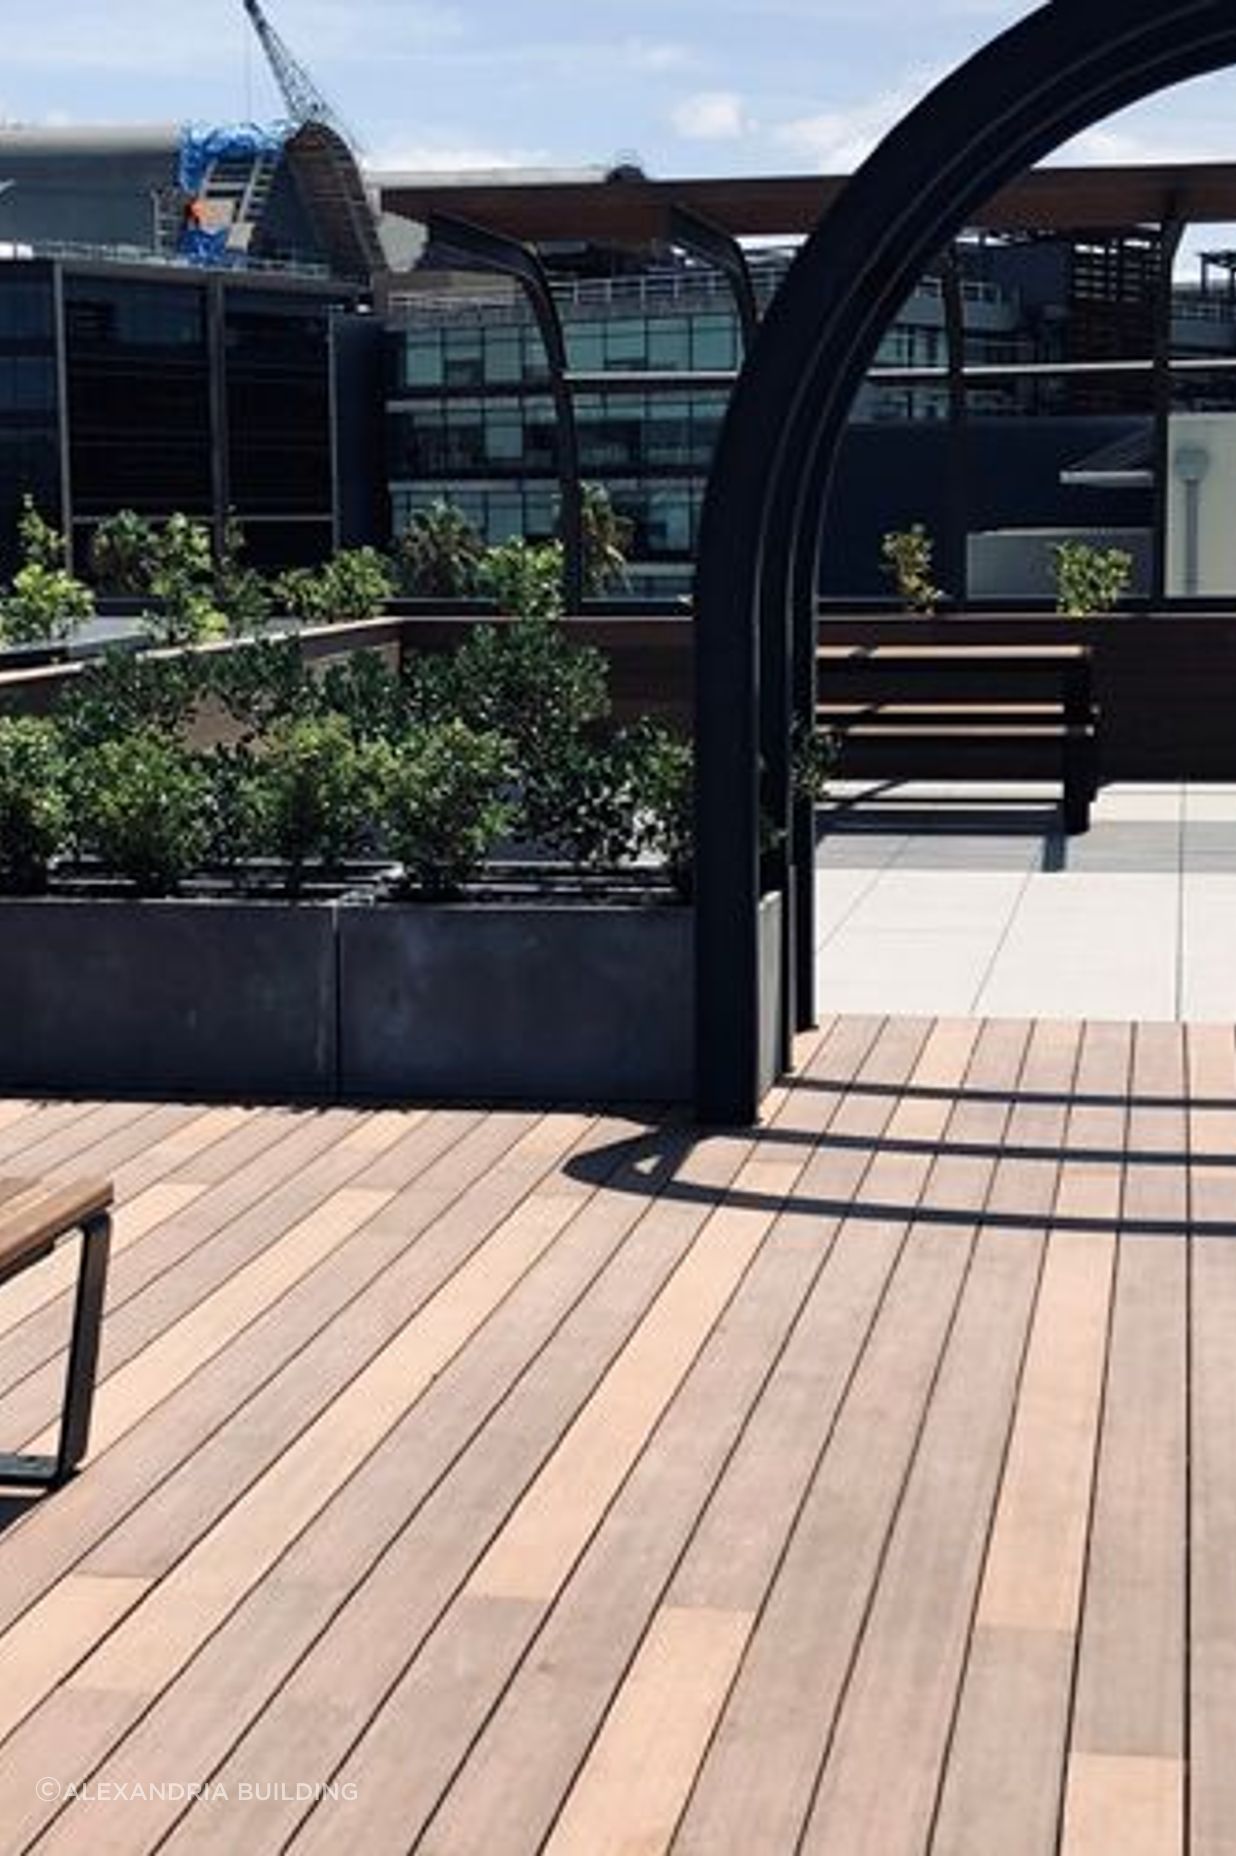 Outdure’s Outdoor Decking Enables A Beautiful Rooftop Space For Iconic Alexandria Building